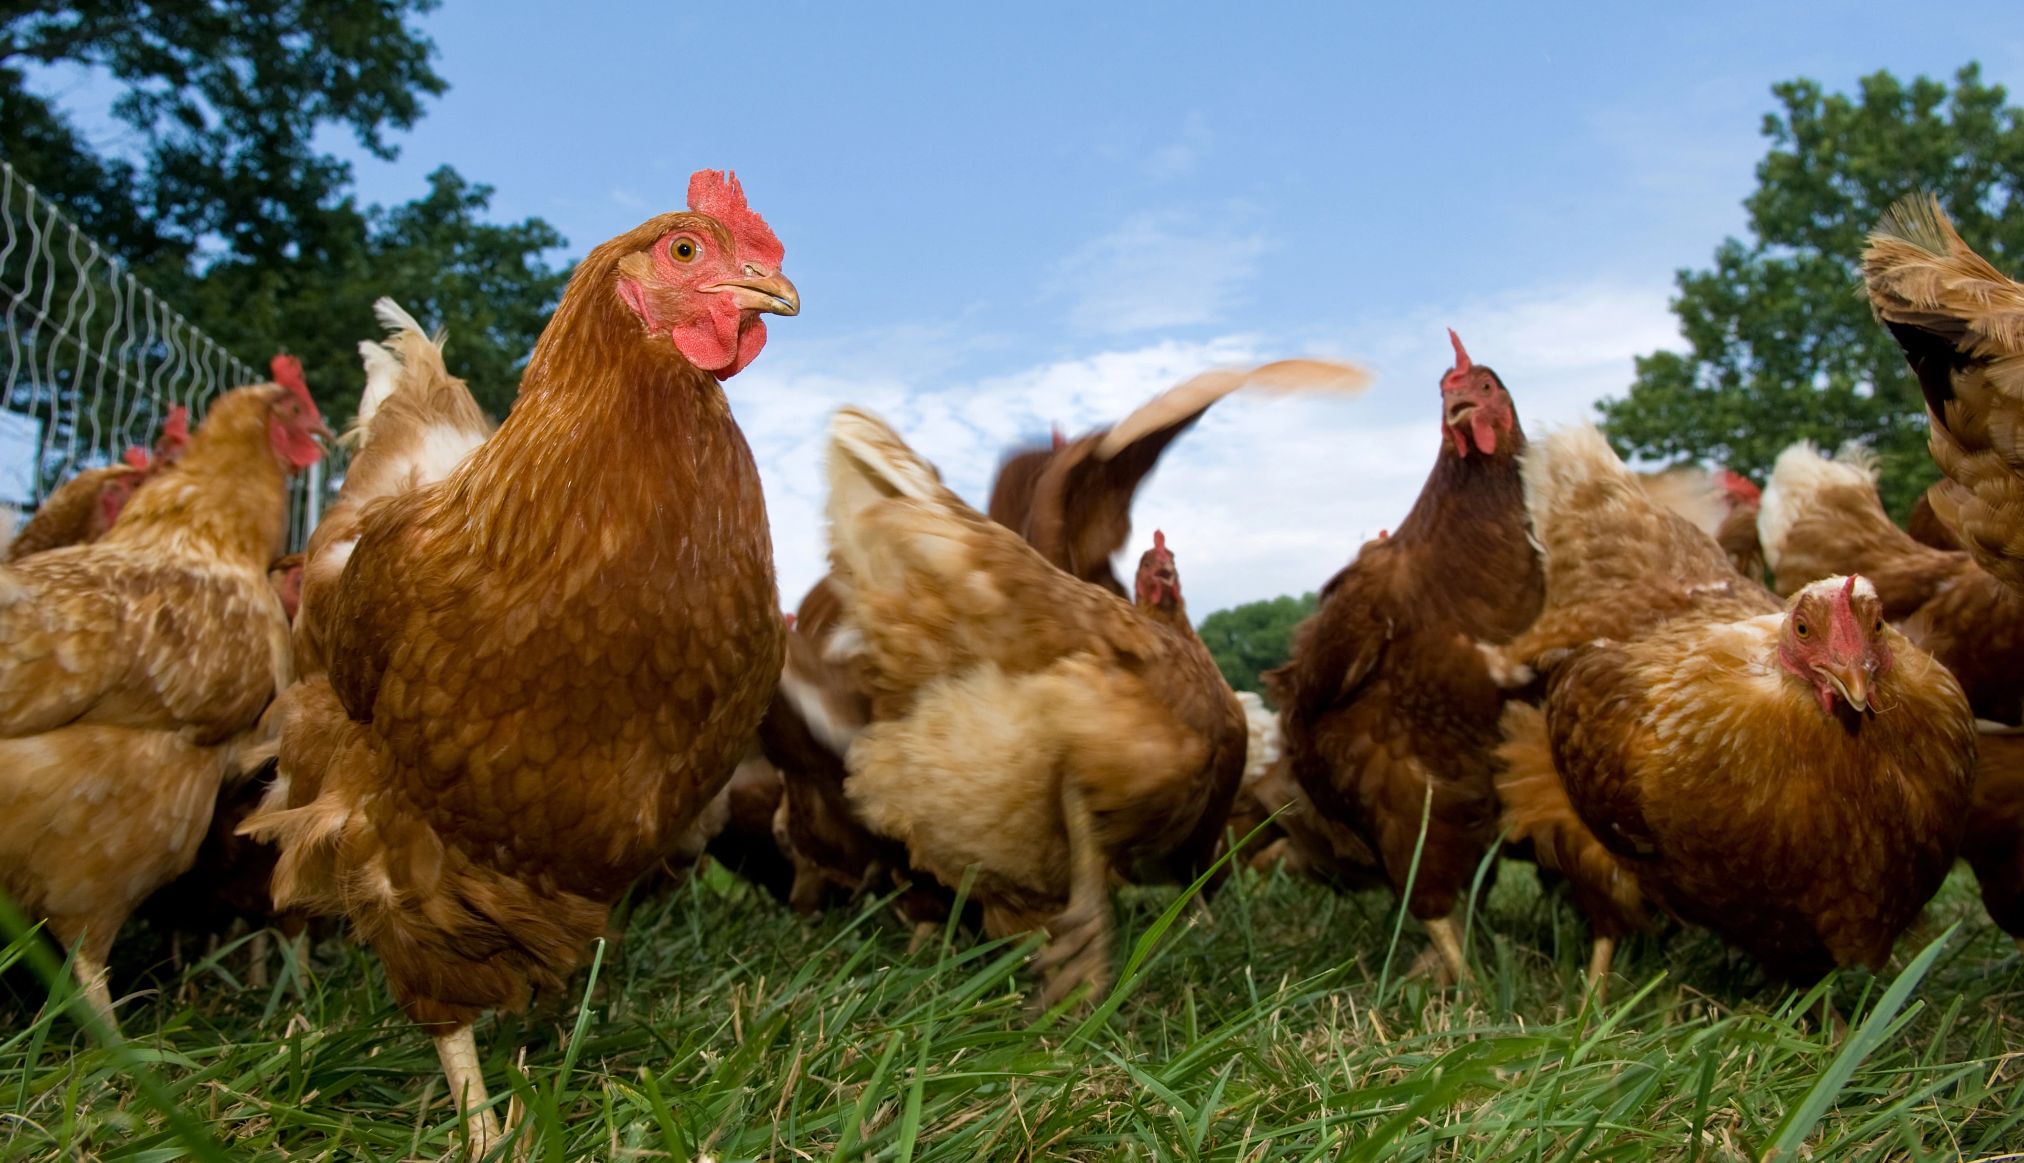 a group of chickens eating on a grassy farm